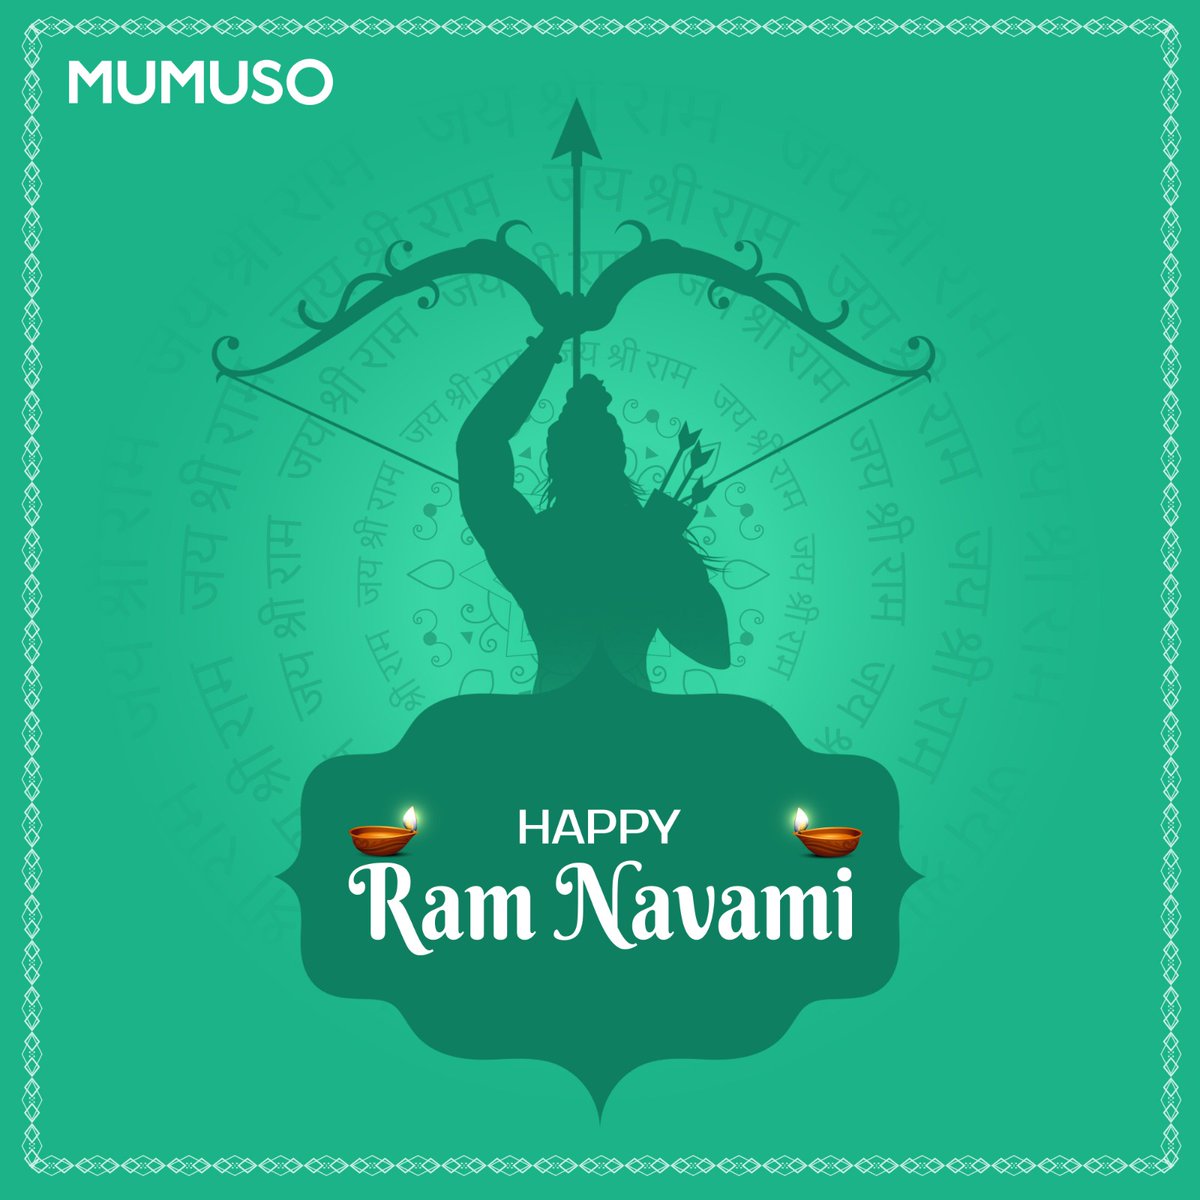 Happy Ram Navami! 🌺

As the new dawn arises, Mumuso wishes that all our lives be filled with positivity, harmony and peace✌🏻. 

#ramnavami #ramnavami2024 #ramnavamifestival #festival #indiansweets #goodoverevil #indianfestival #festivalsofindia #festivemood #festivefun #MUMUSO